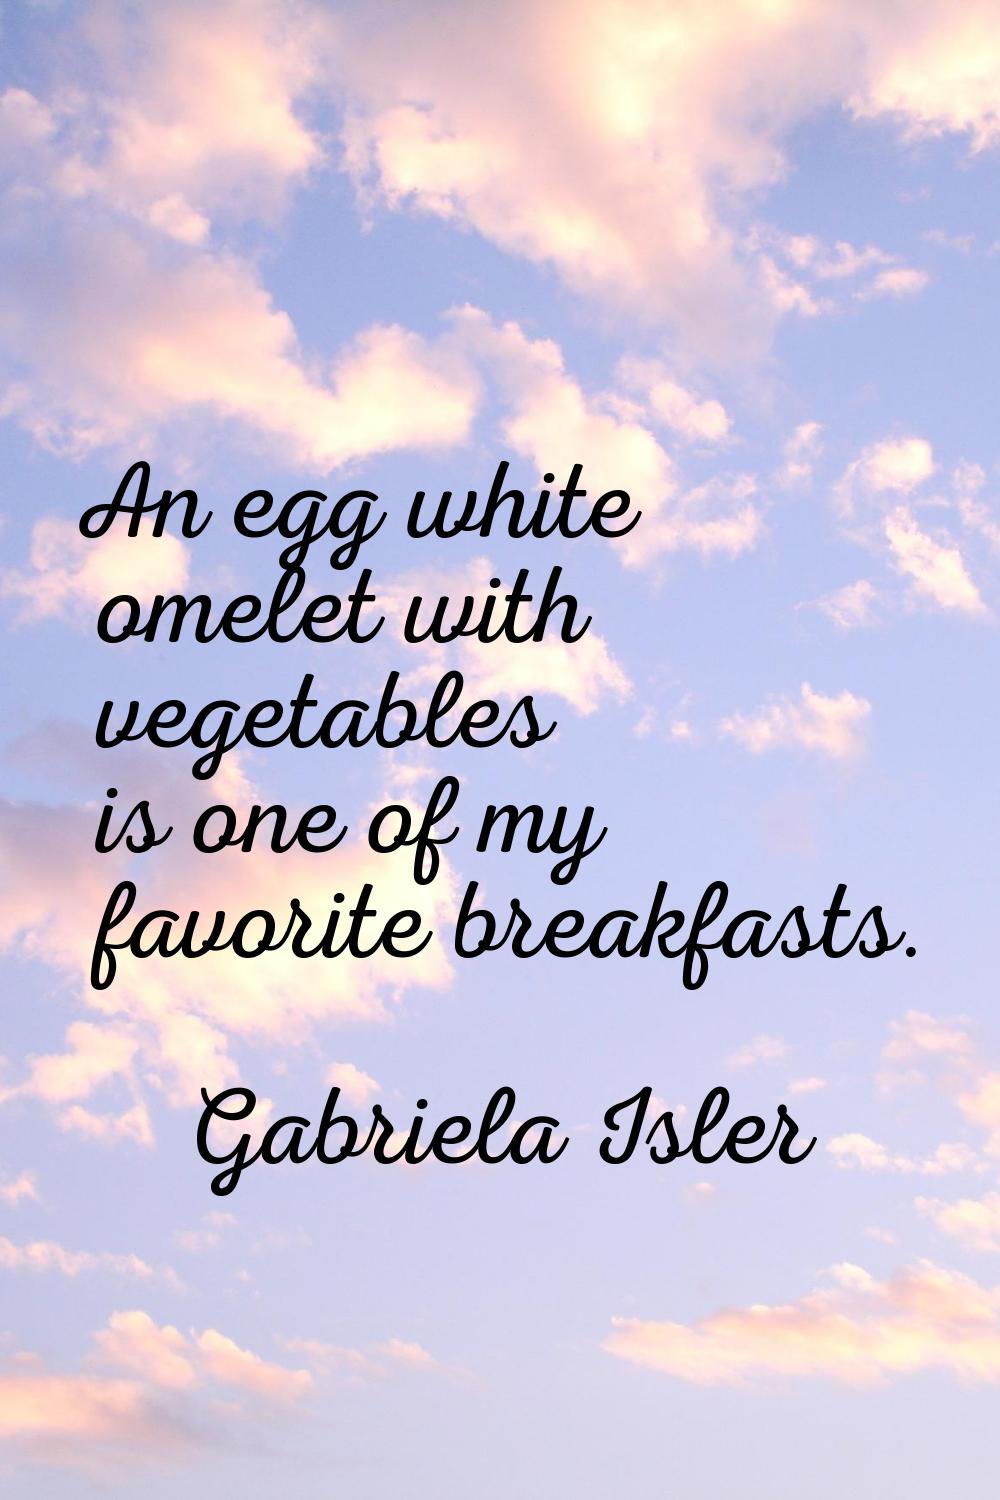 An egg white omelet with vegetables is one of my favorite breakfasts.